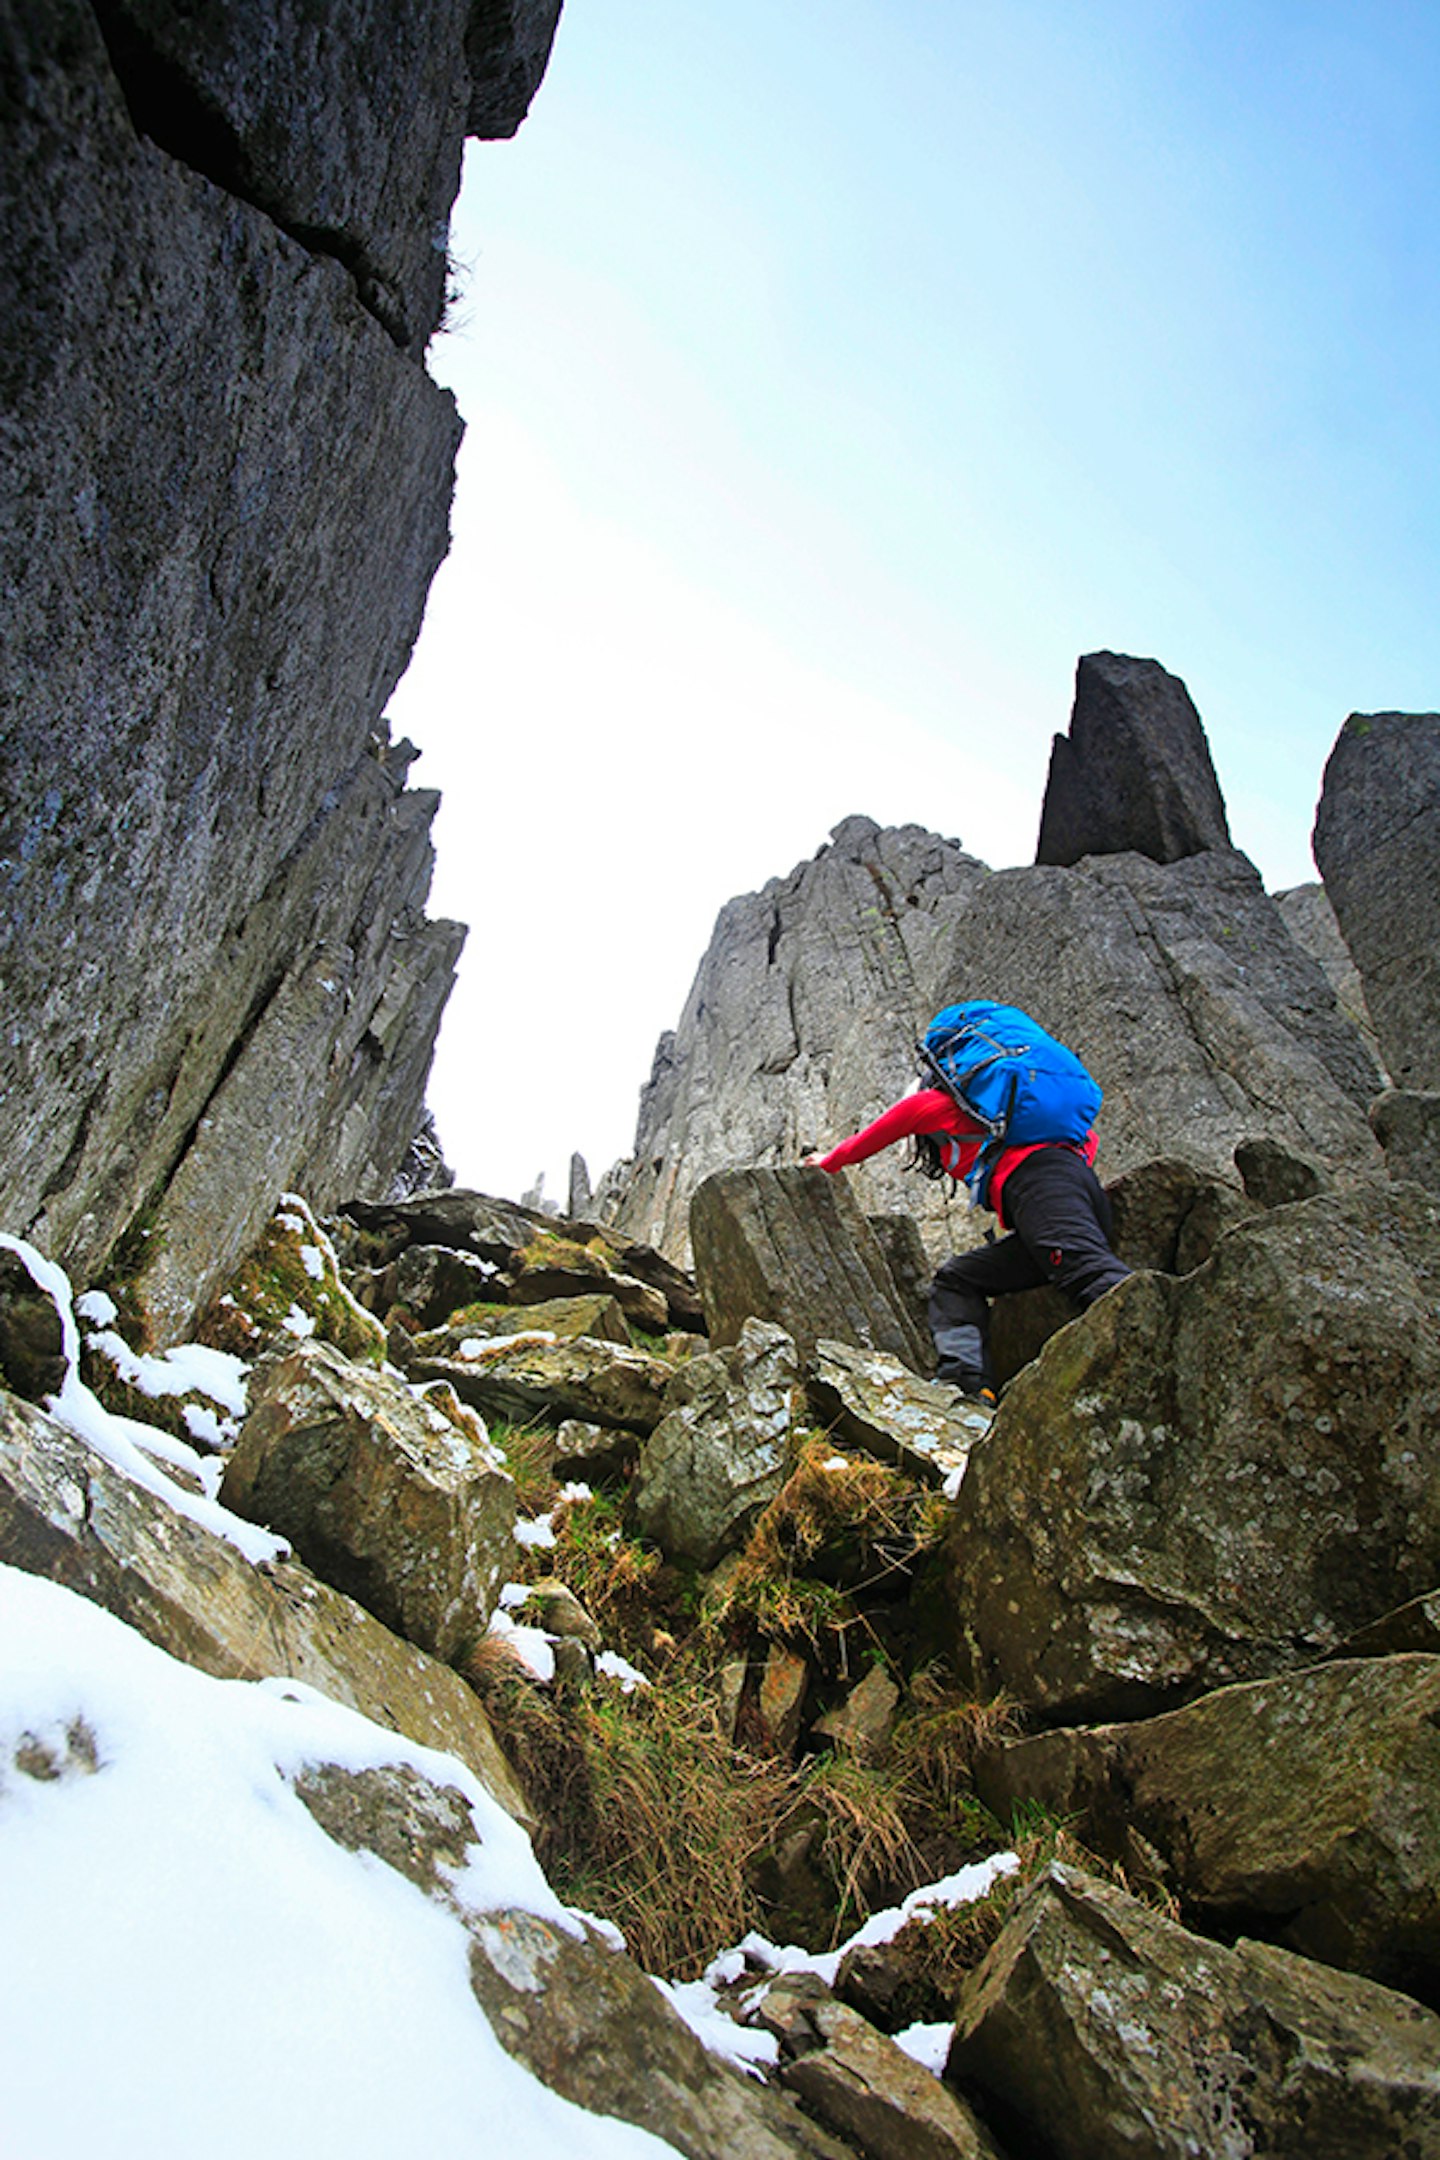 The alternative approach (5b) to The Notch from the eastern traverse path.